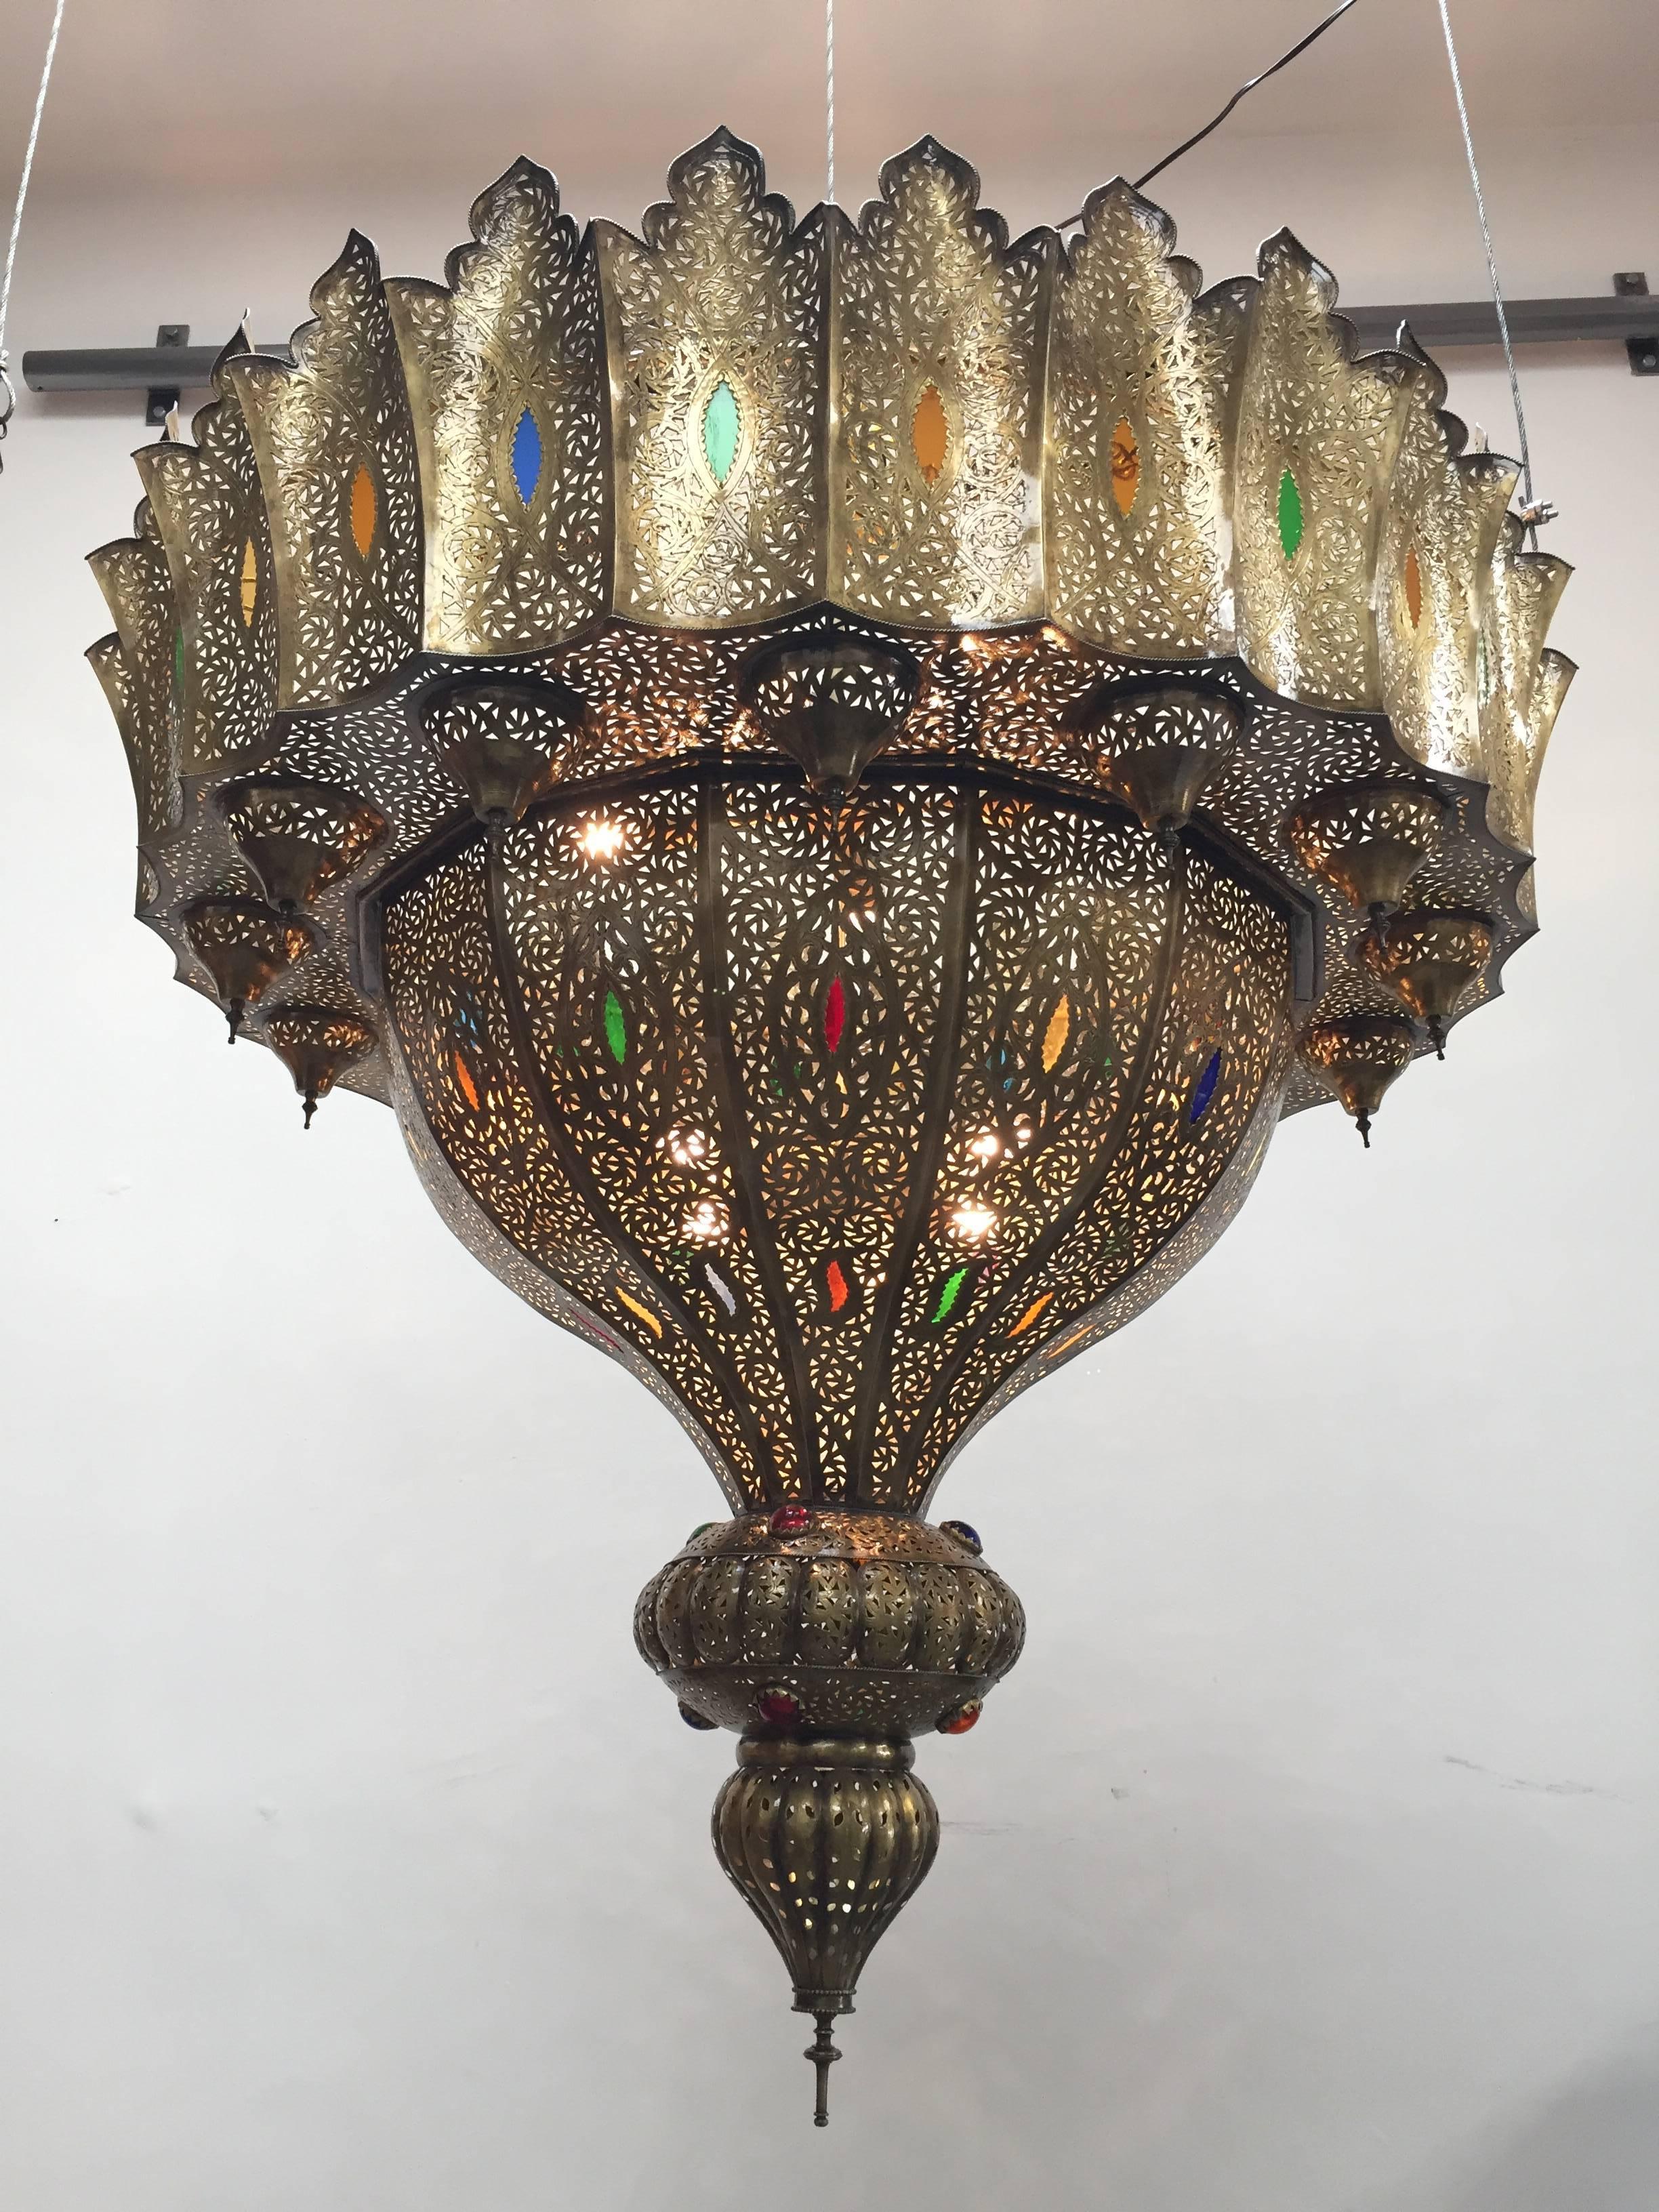 Oversize brass Moroccan Moorish chandelier in the style of Alberto Pinto Moorish design.
Delicately handcrafted in brass repousse and chiseled with fine filigree designs and handblown glass.
Oversized exquisite hand pierced brass Moroccan light